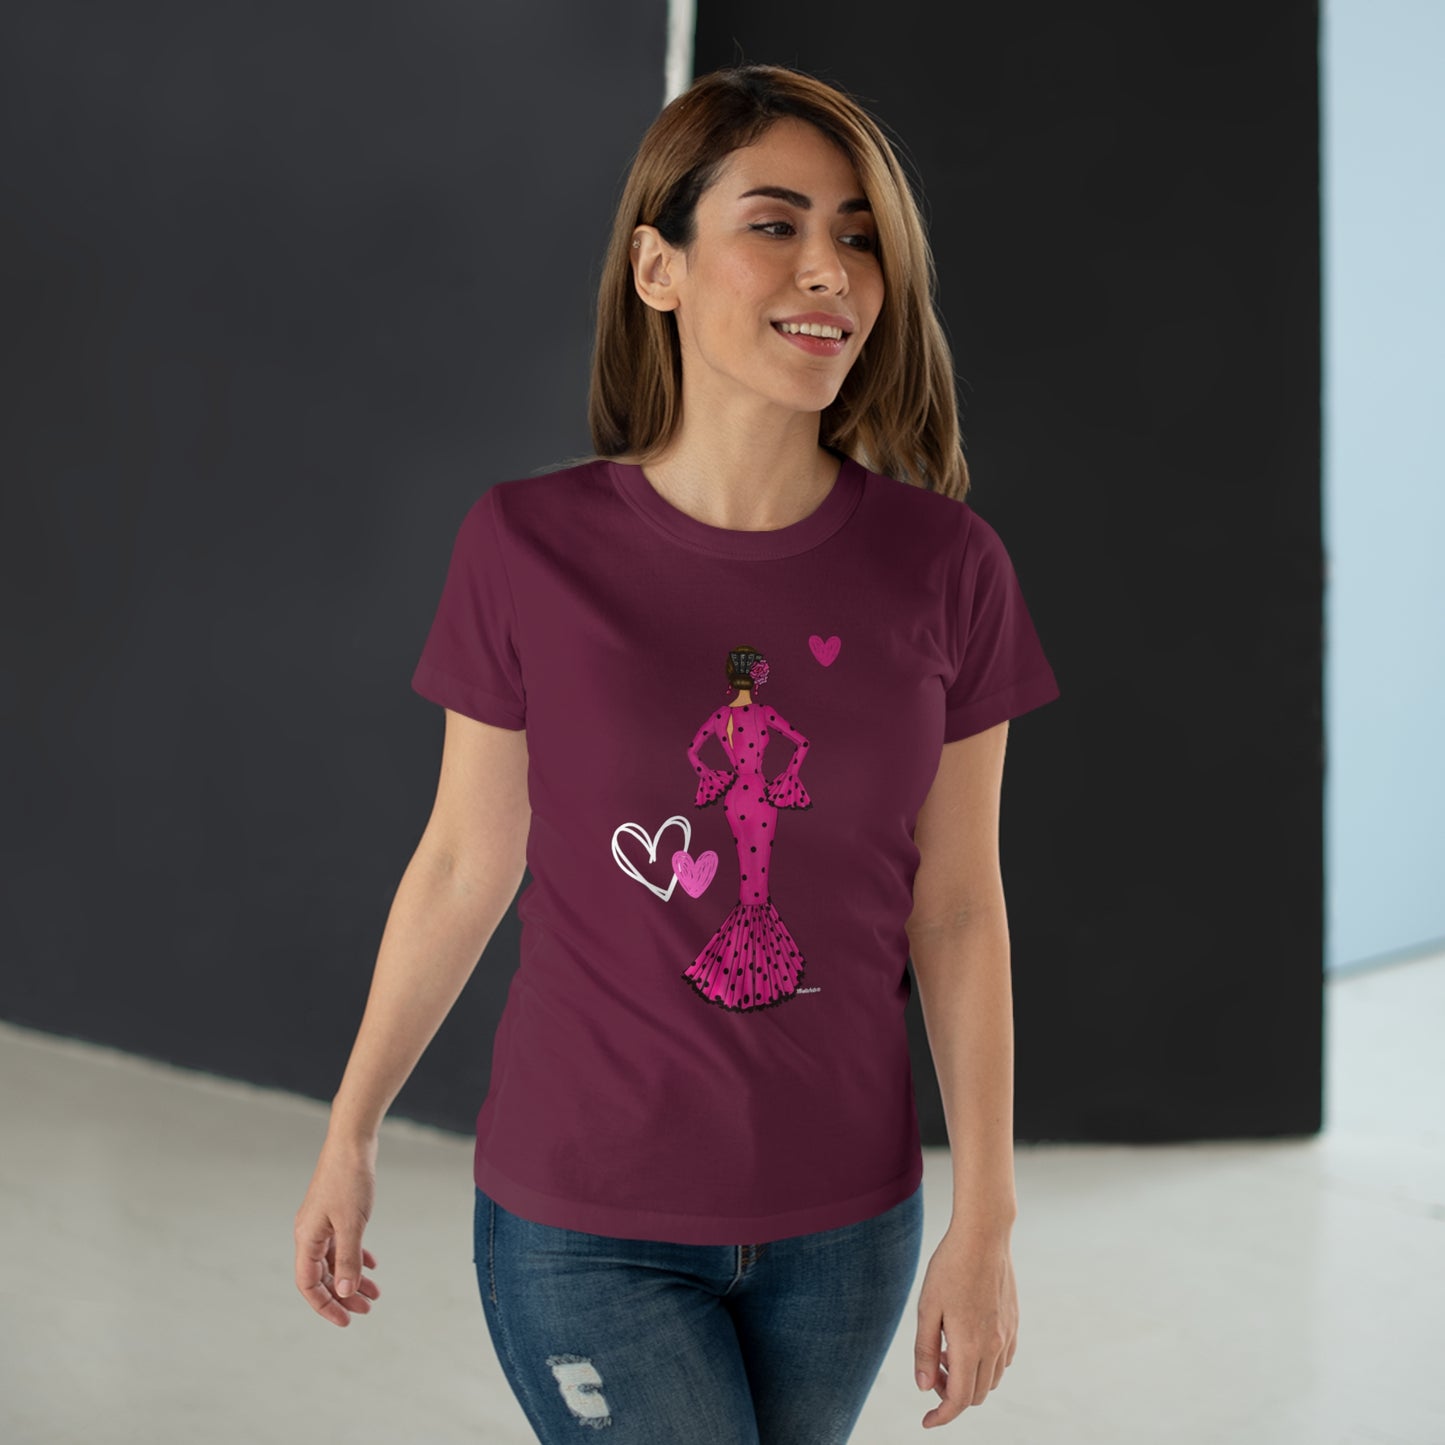 a woman wearing a t - shirt with a pink design on it